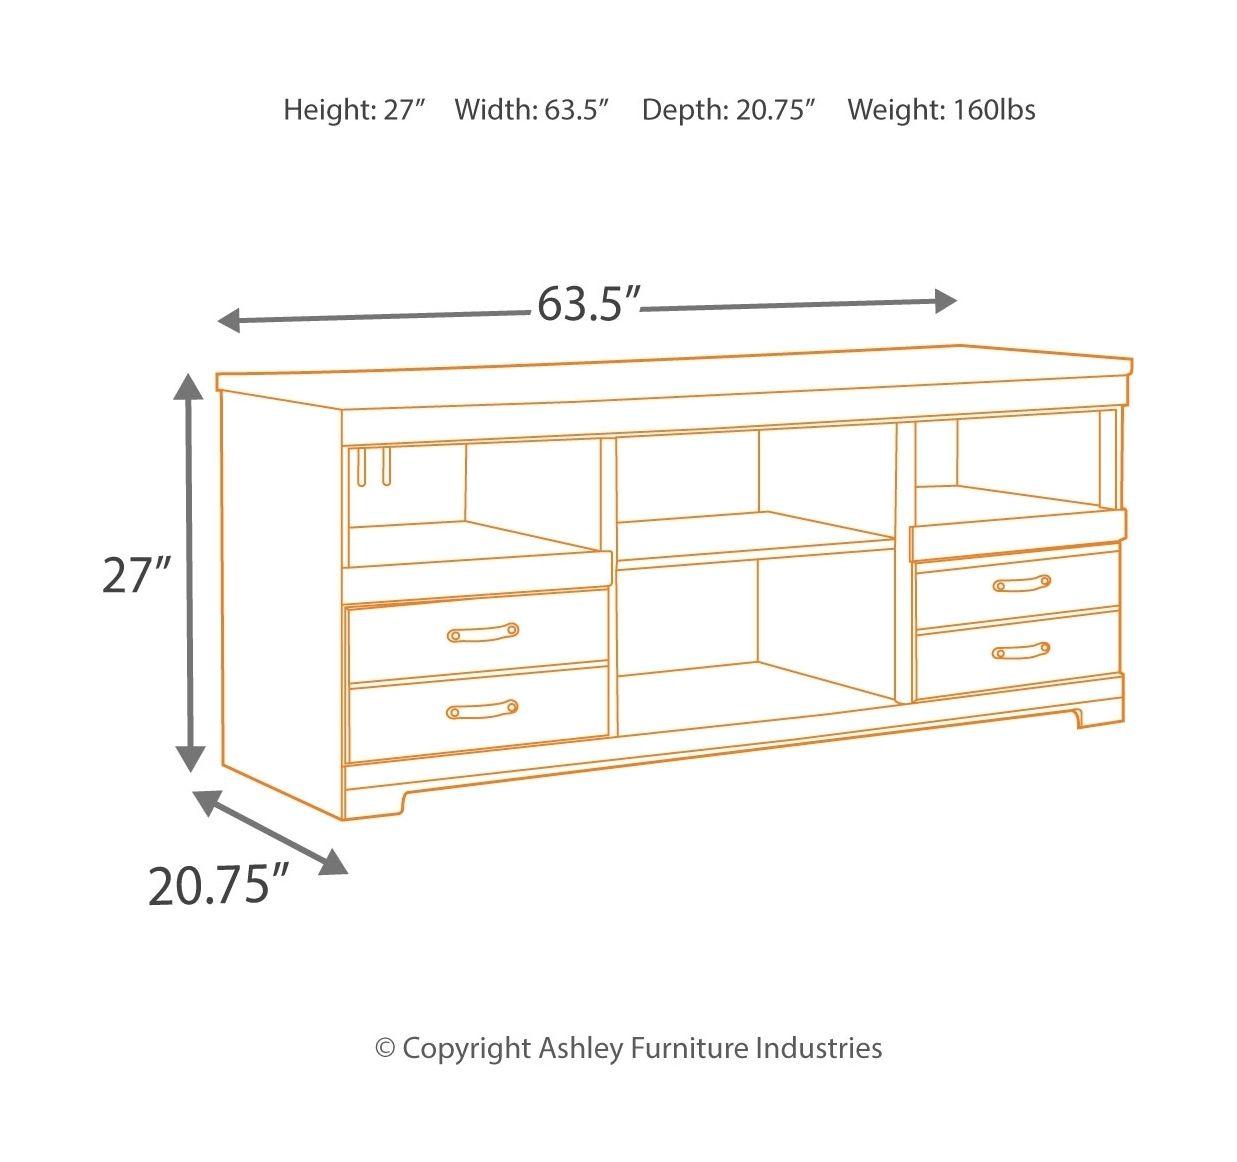 Signature Design by Ashley® - Trinell - Entertainment Center - 5th Avenue Furniture